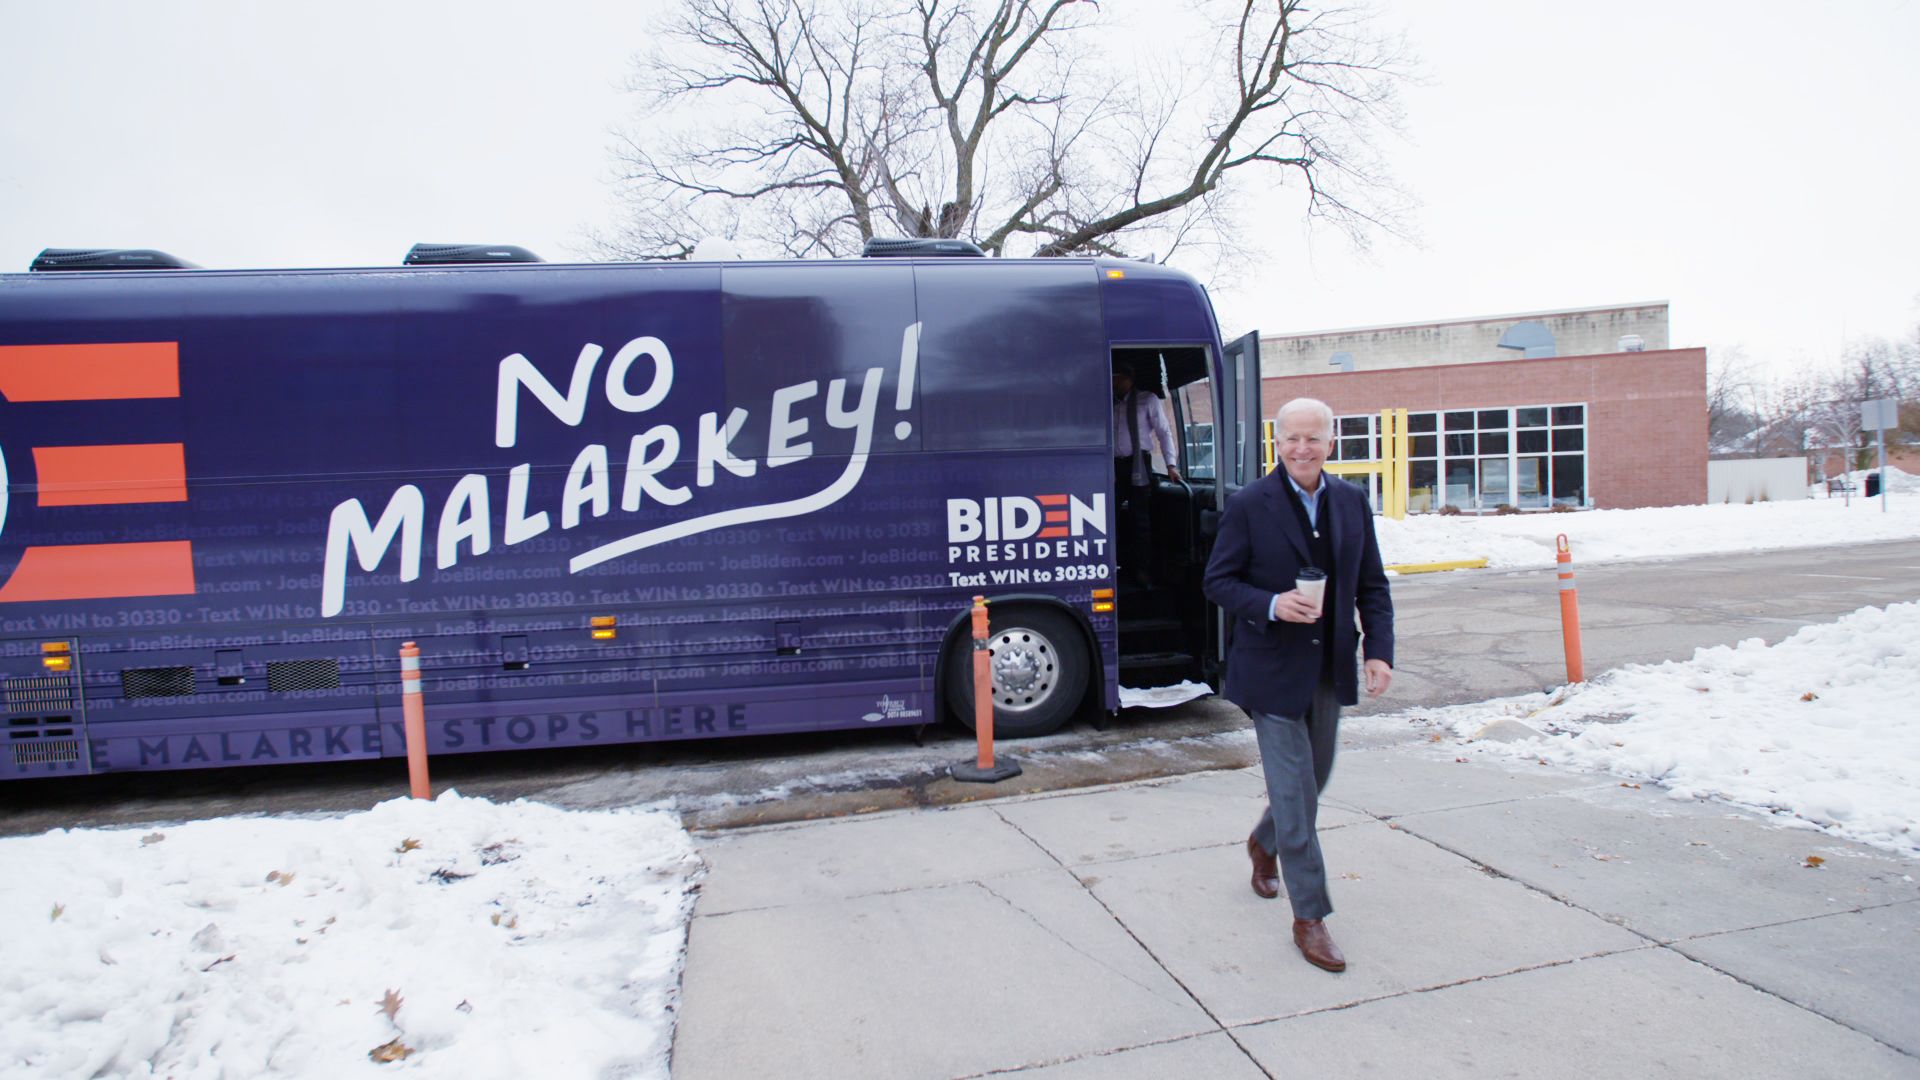 Joe Biden walks out of a bus with No Malarkey painted on the side